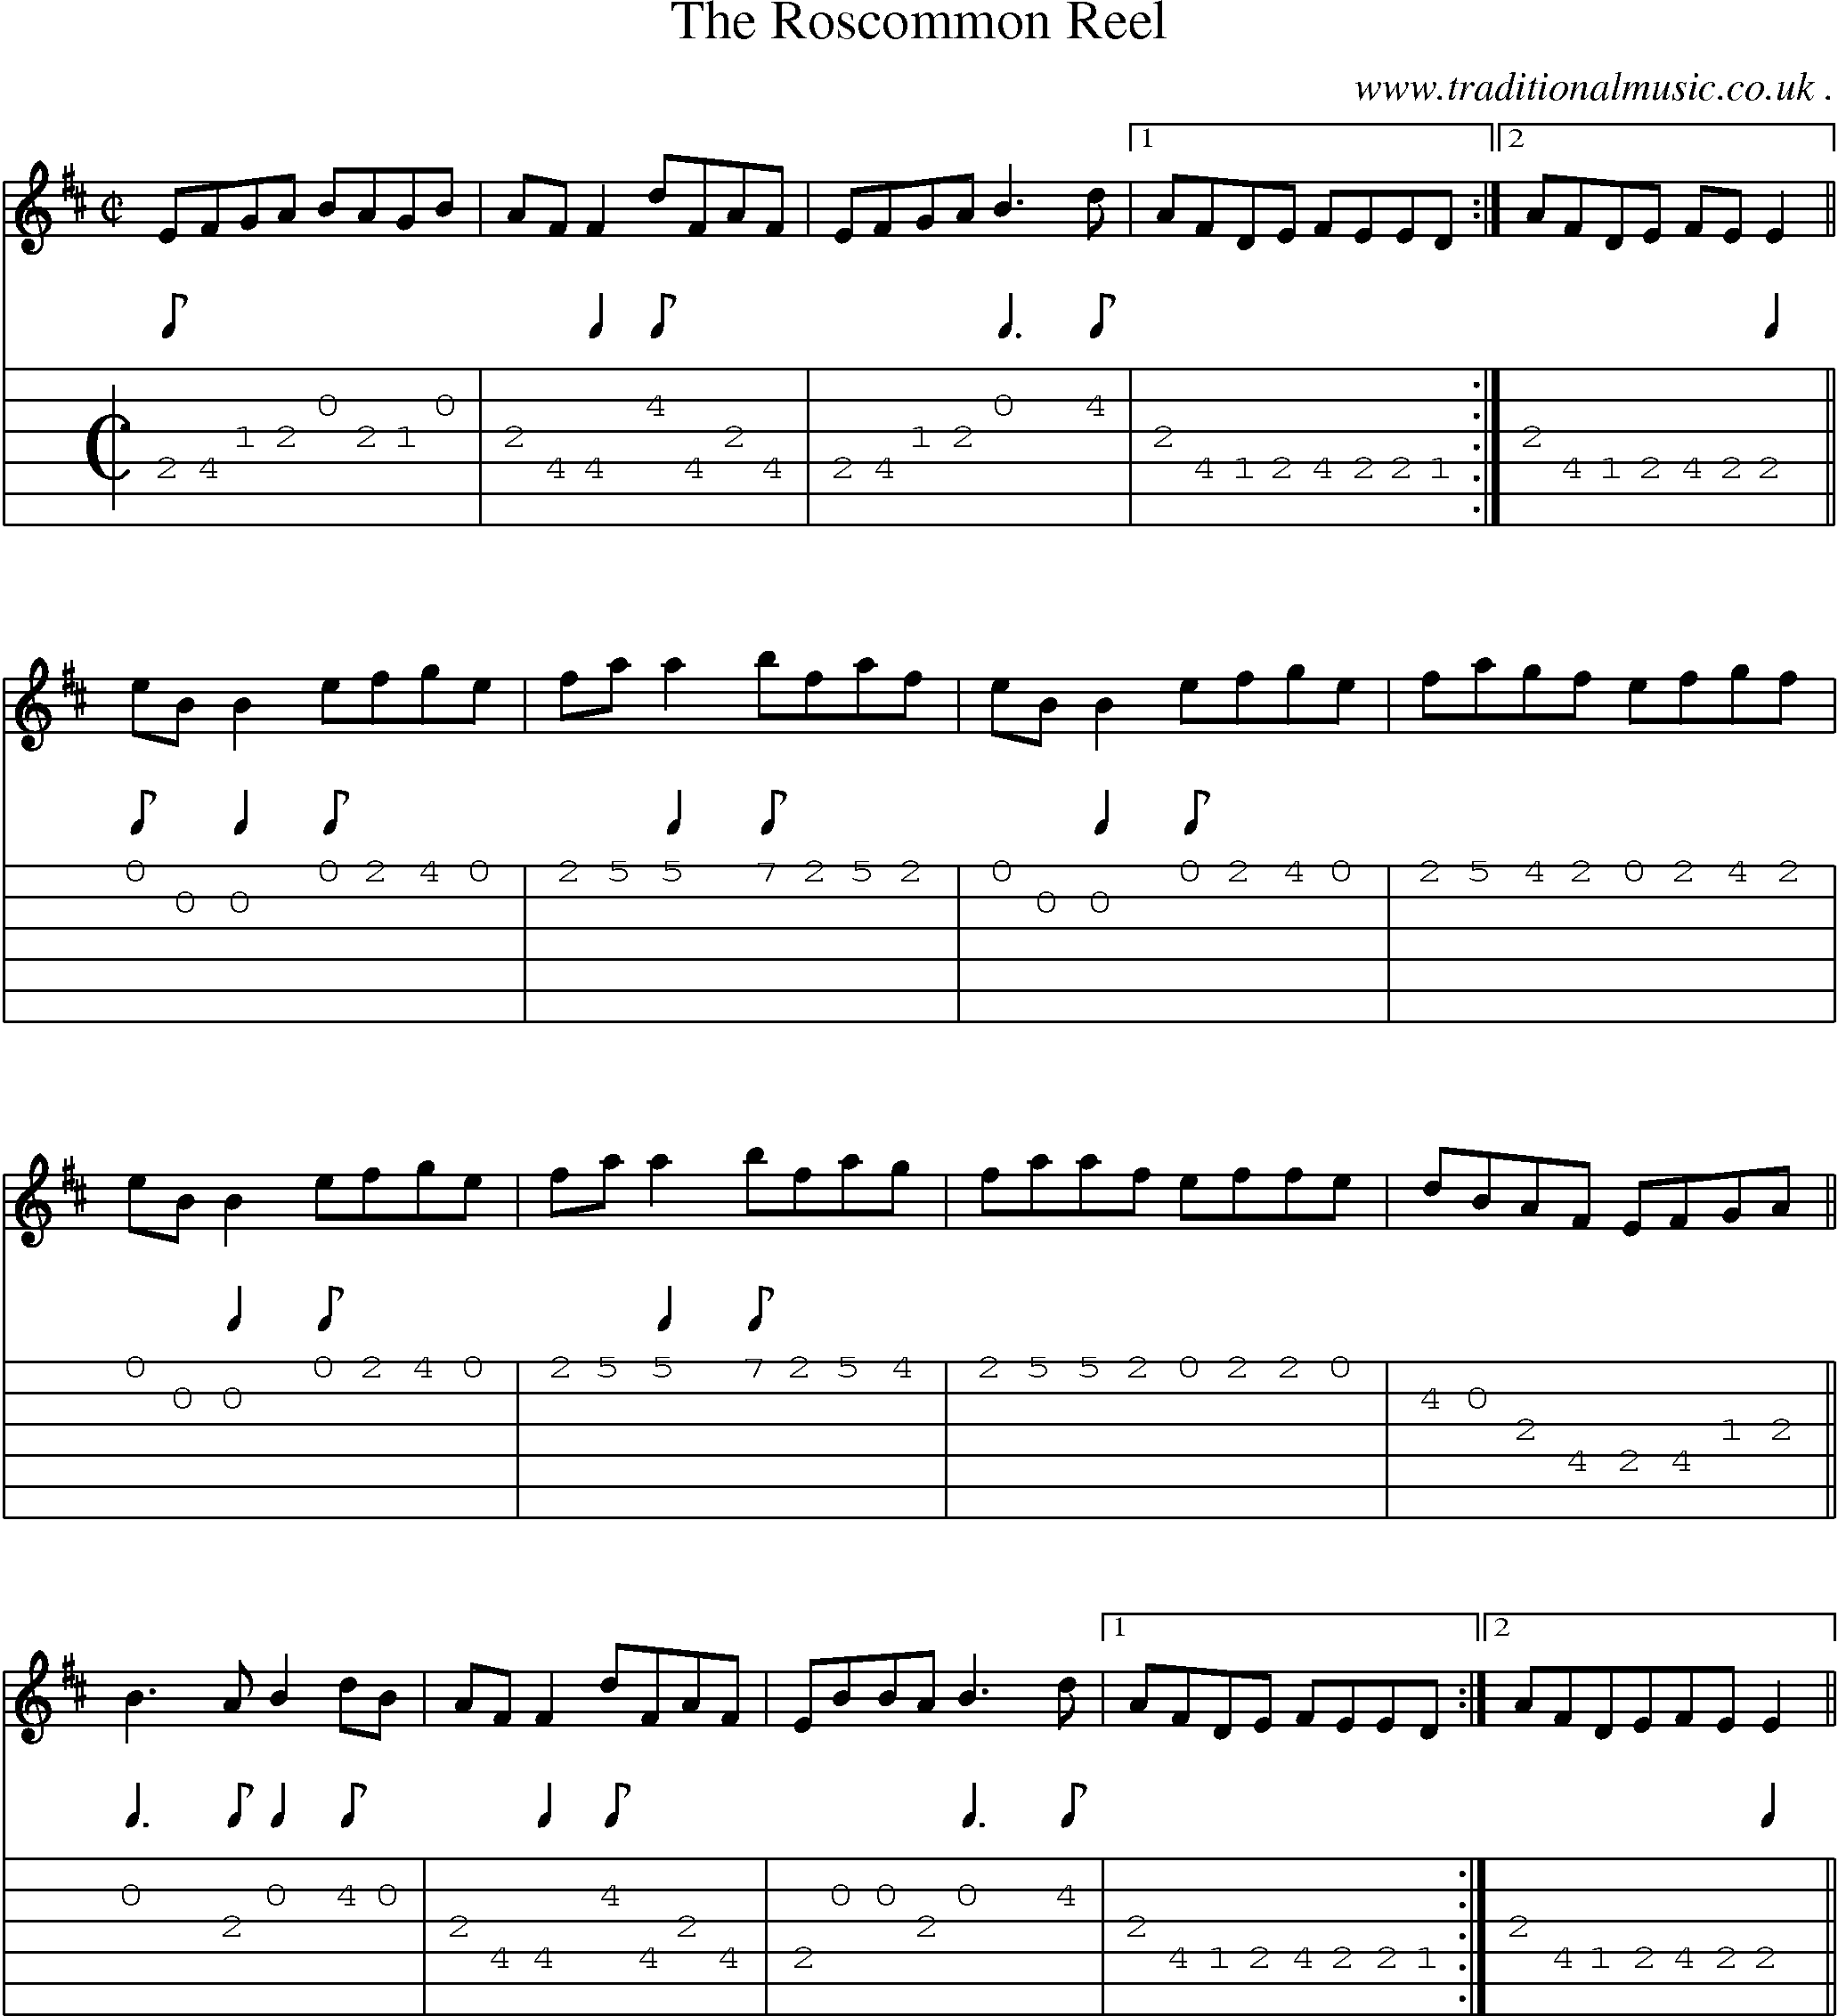 Sheet-Music and Guitar Tabs for The Roscommon Reel